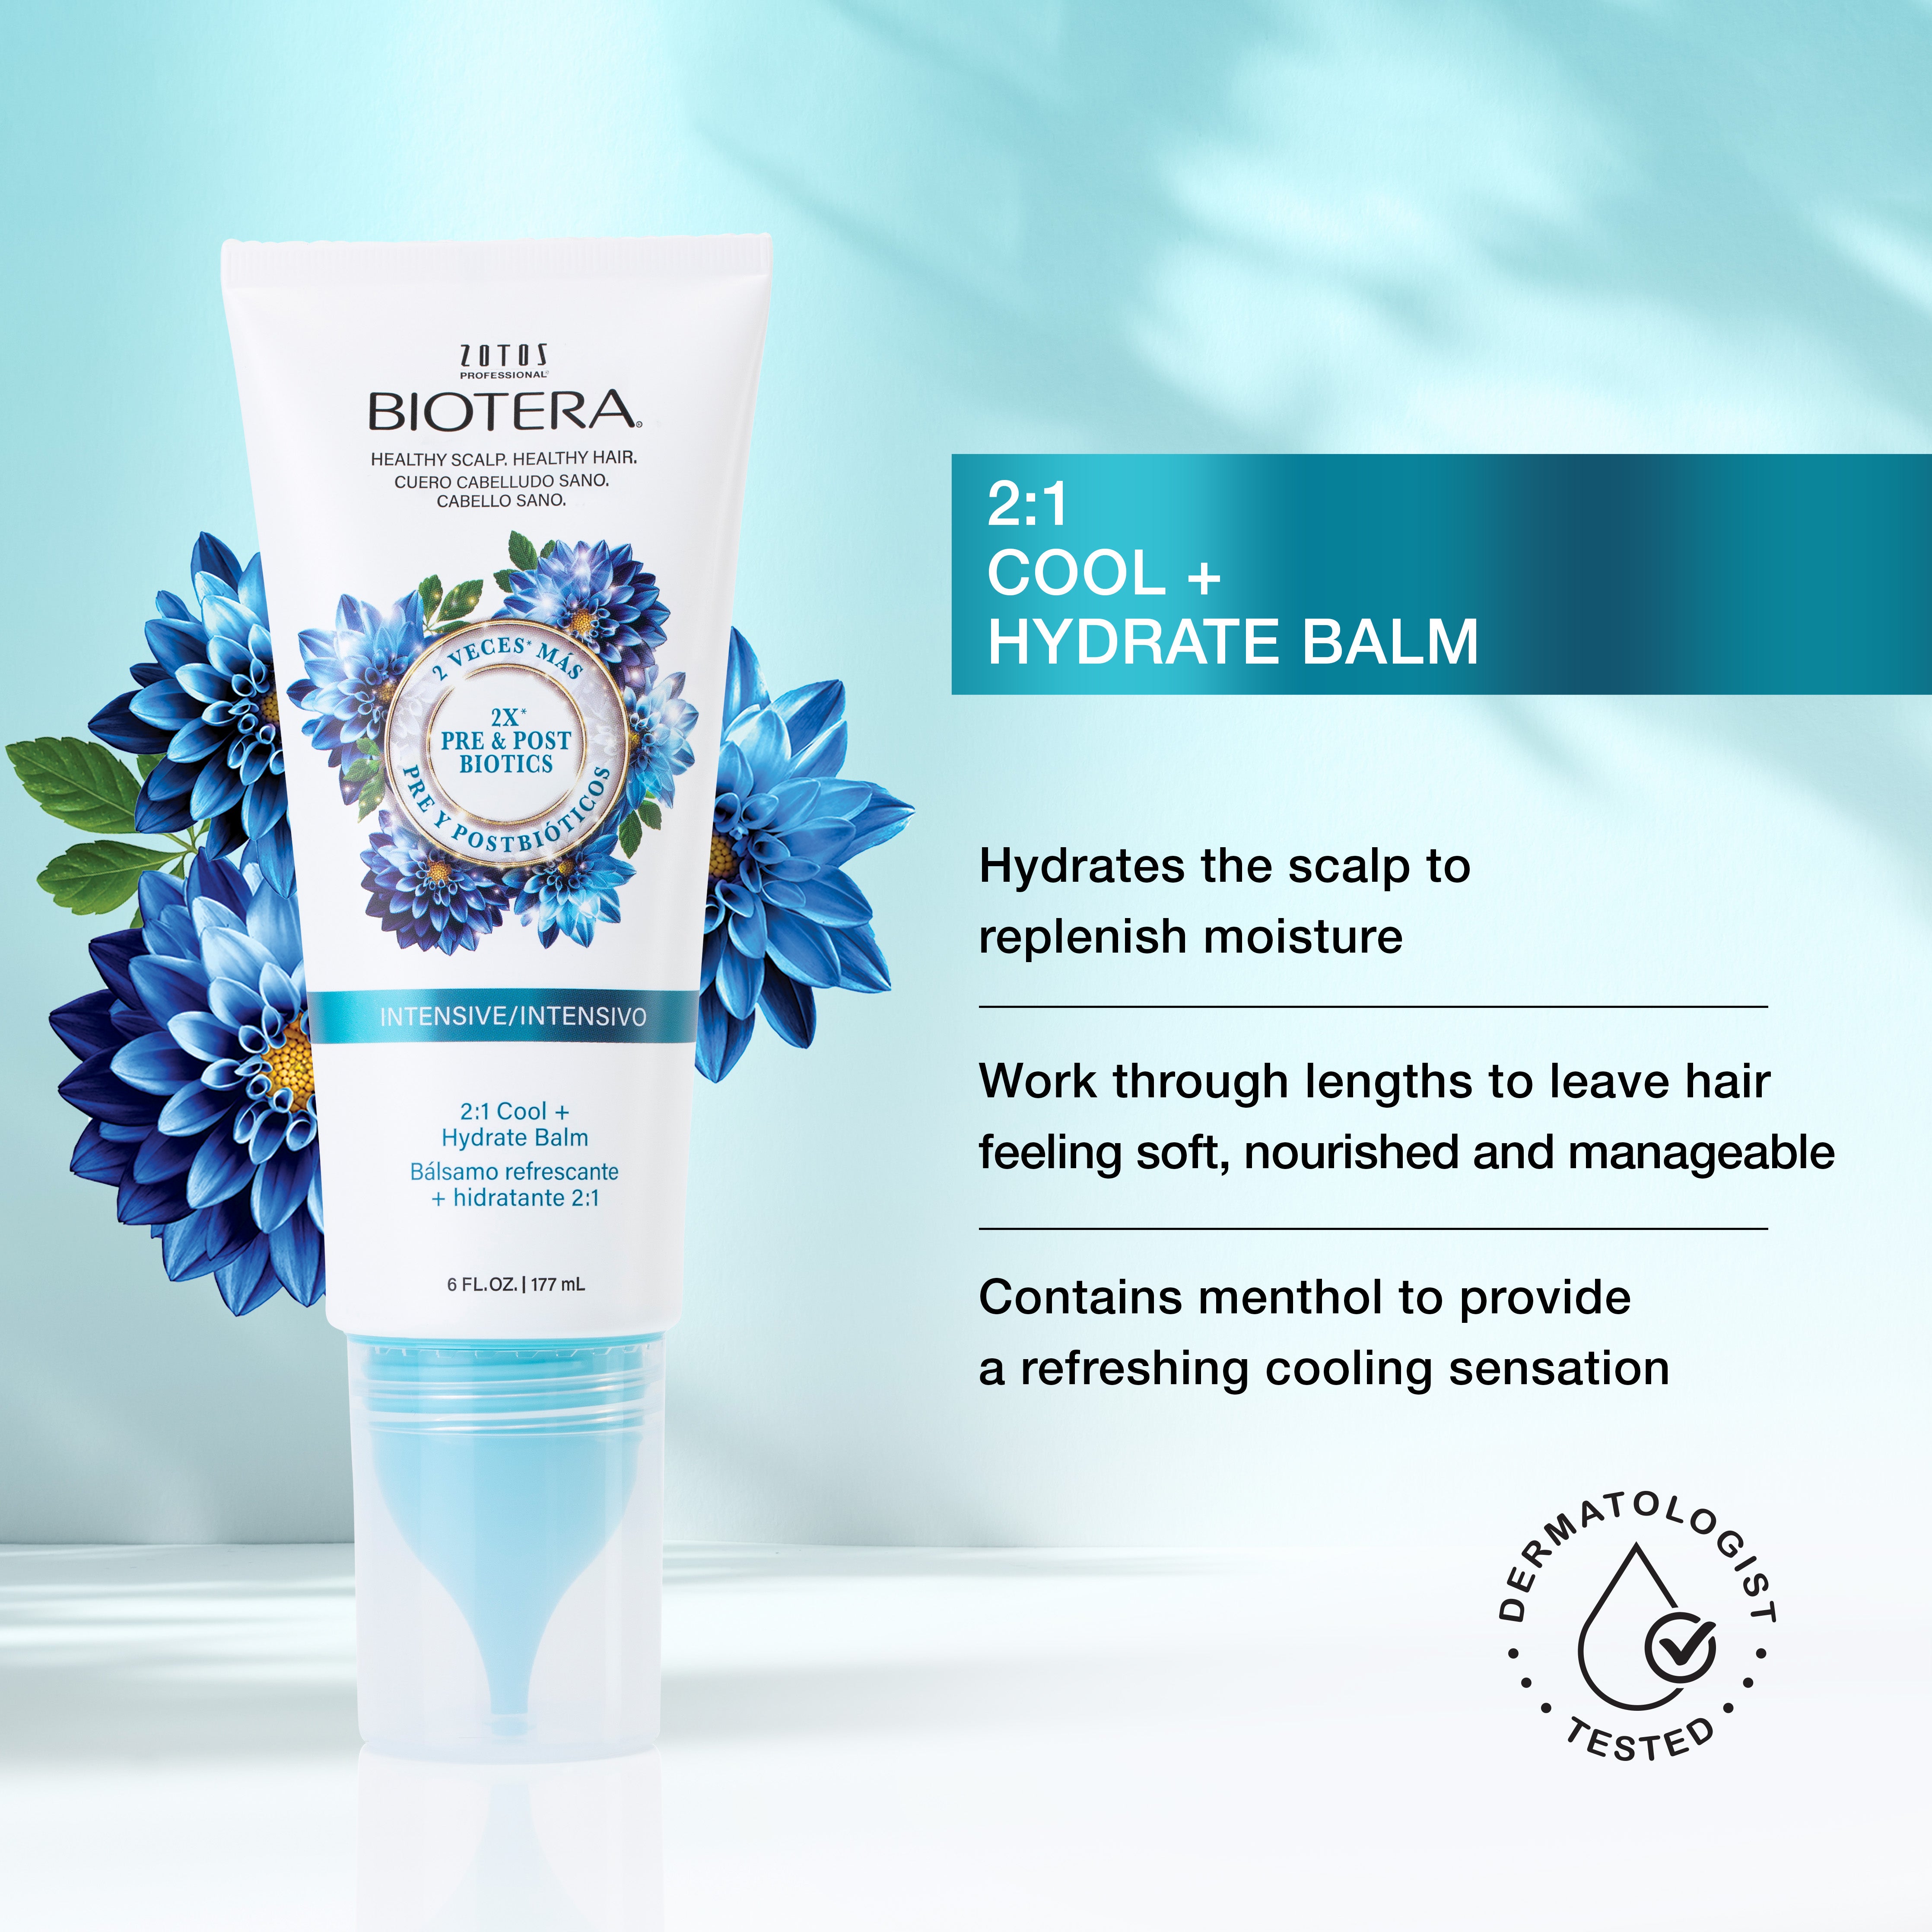 Hydrates the scalp to replenish moisture, work through lengths to leave hair feeling soft, nourished and manageable, and contains menthol to provide a refreshing cooling sensation. Dermatologist tested.